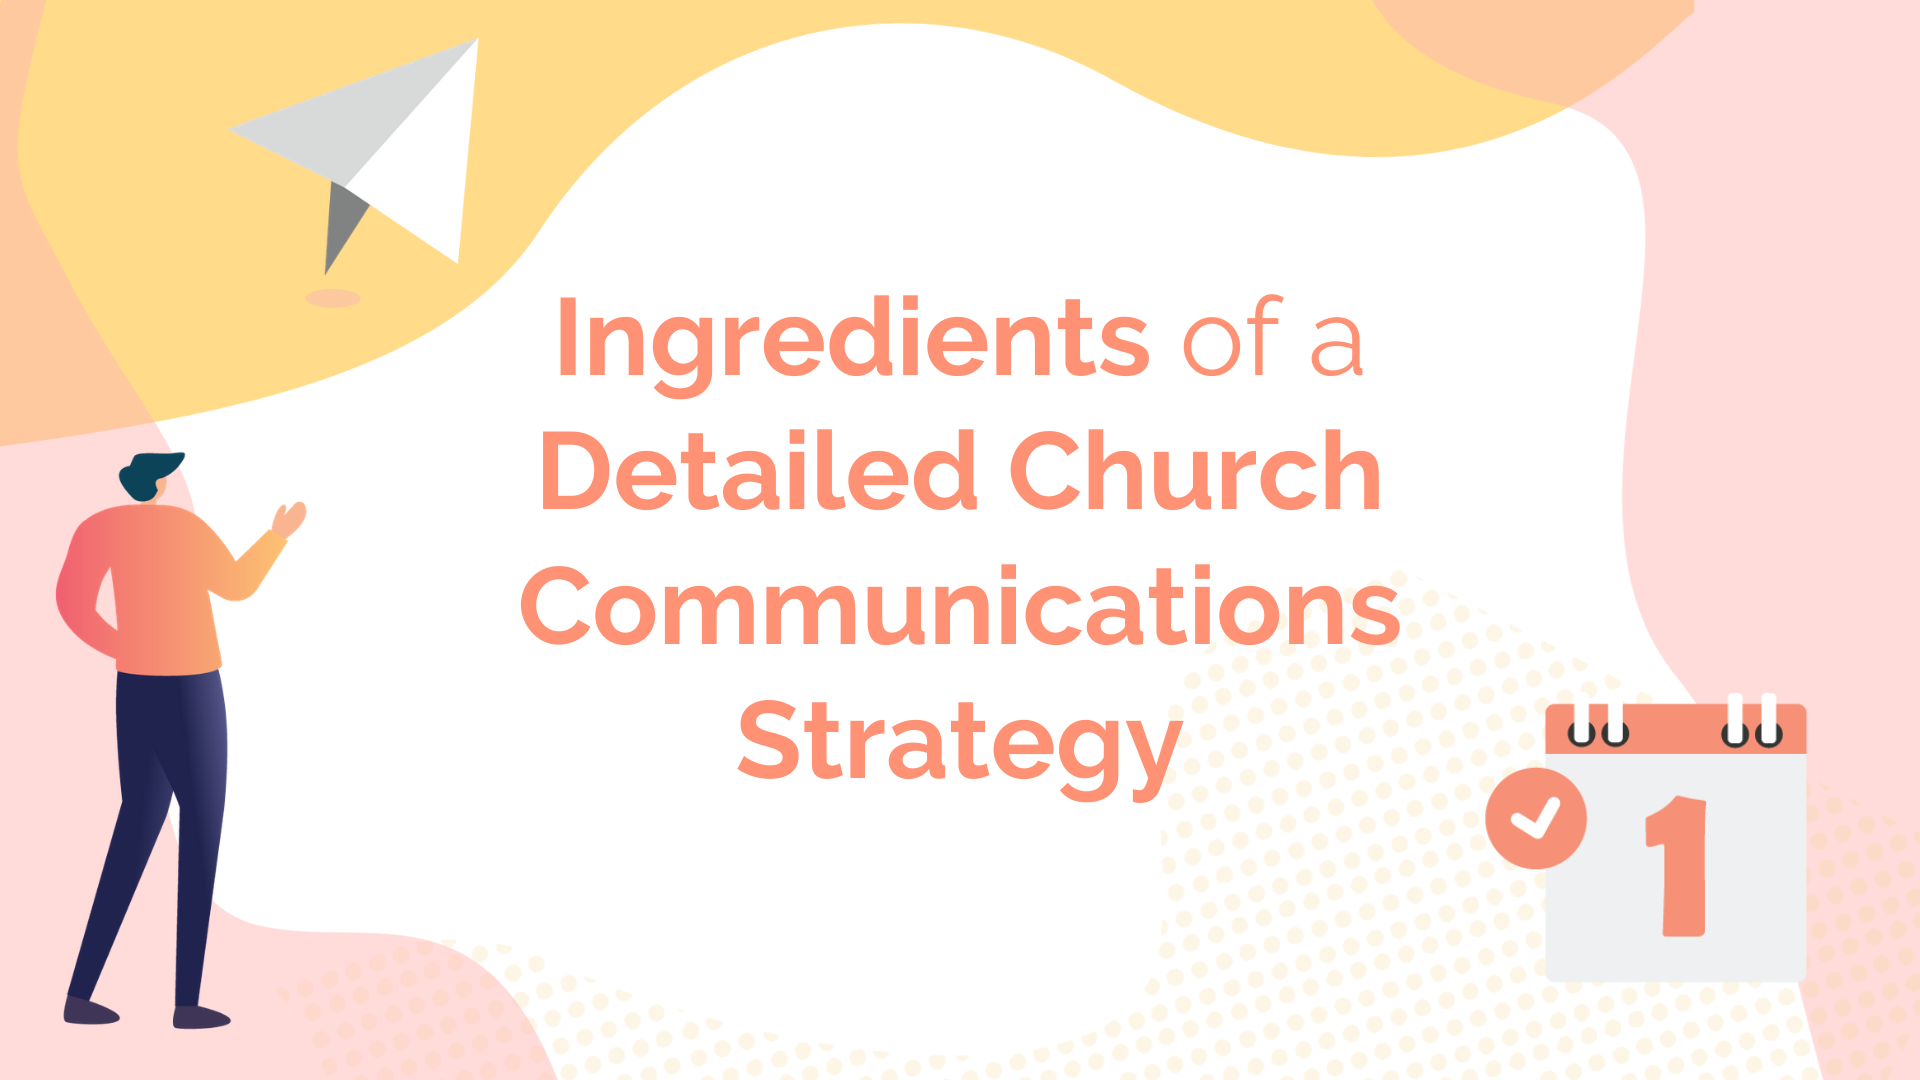 Ingredients of a Detailed Church Communications Strategy